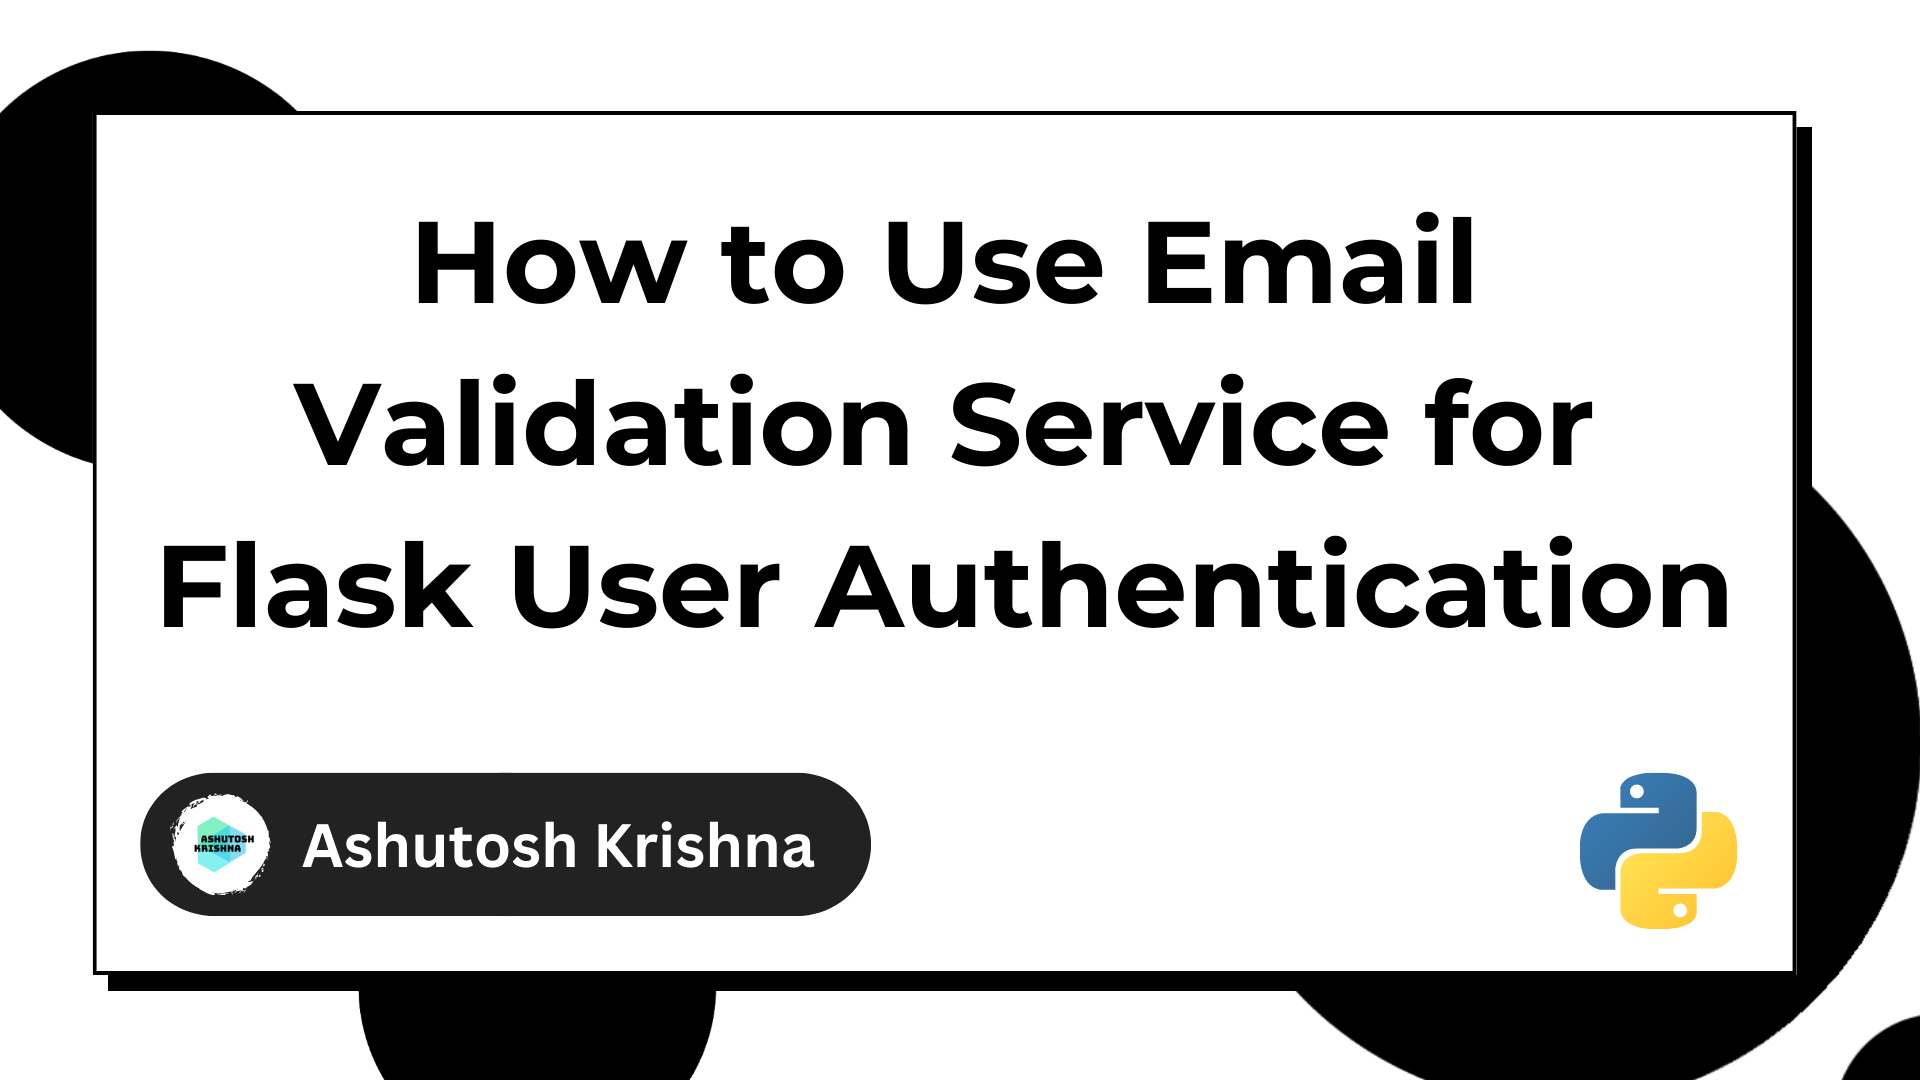 How to Use an Email Validation Service for Flask User Authentication